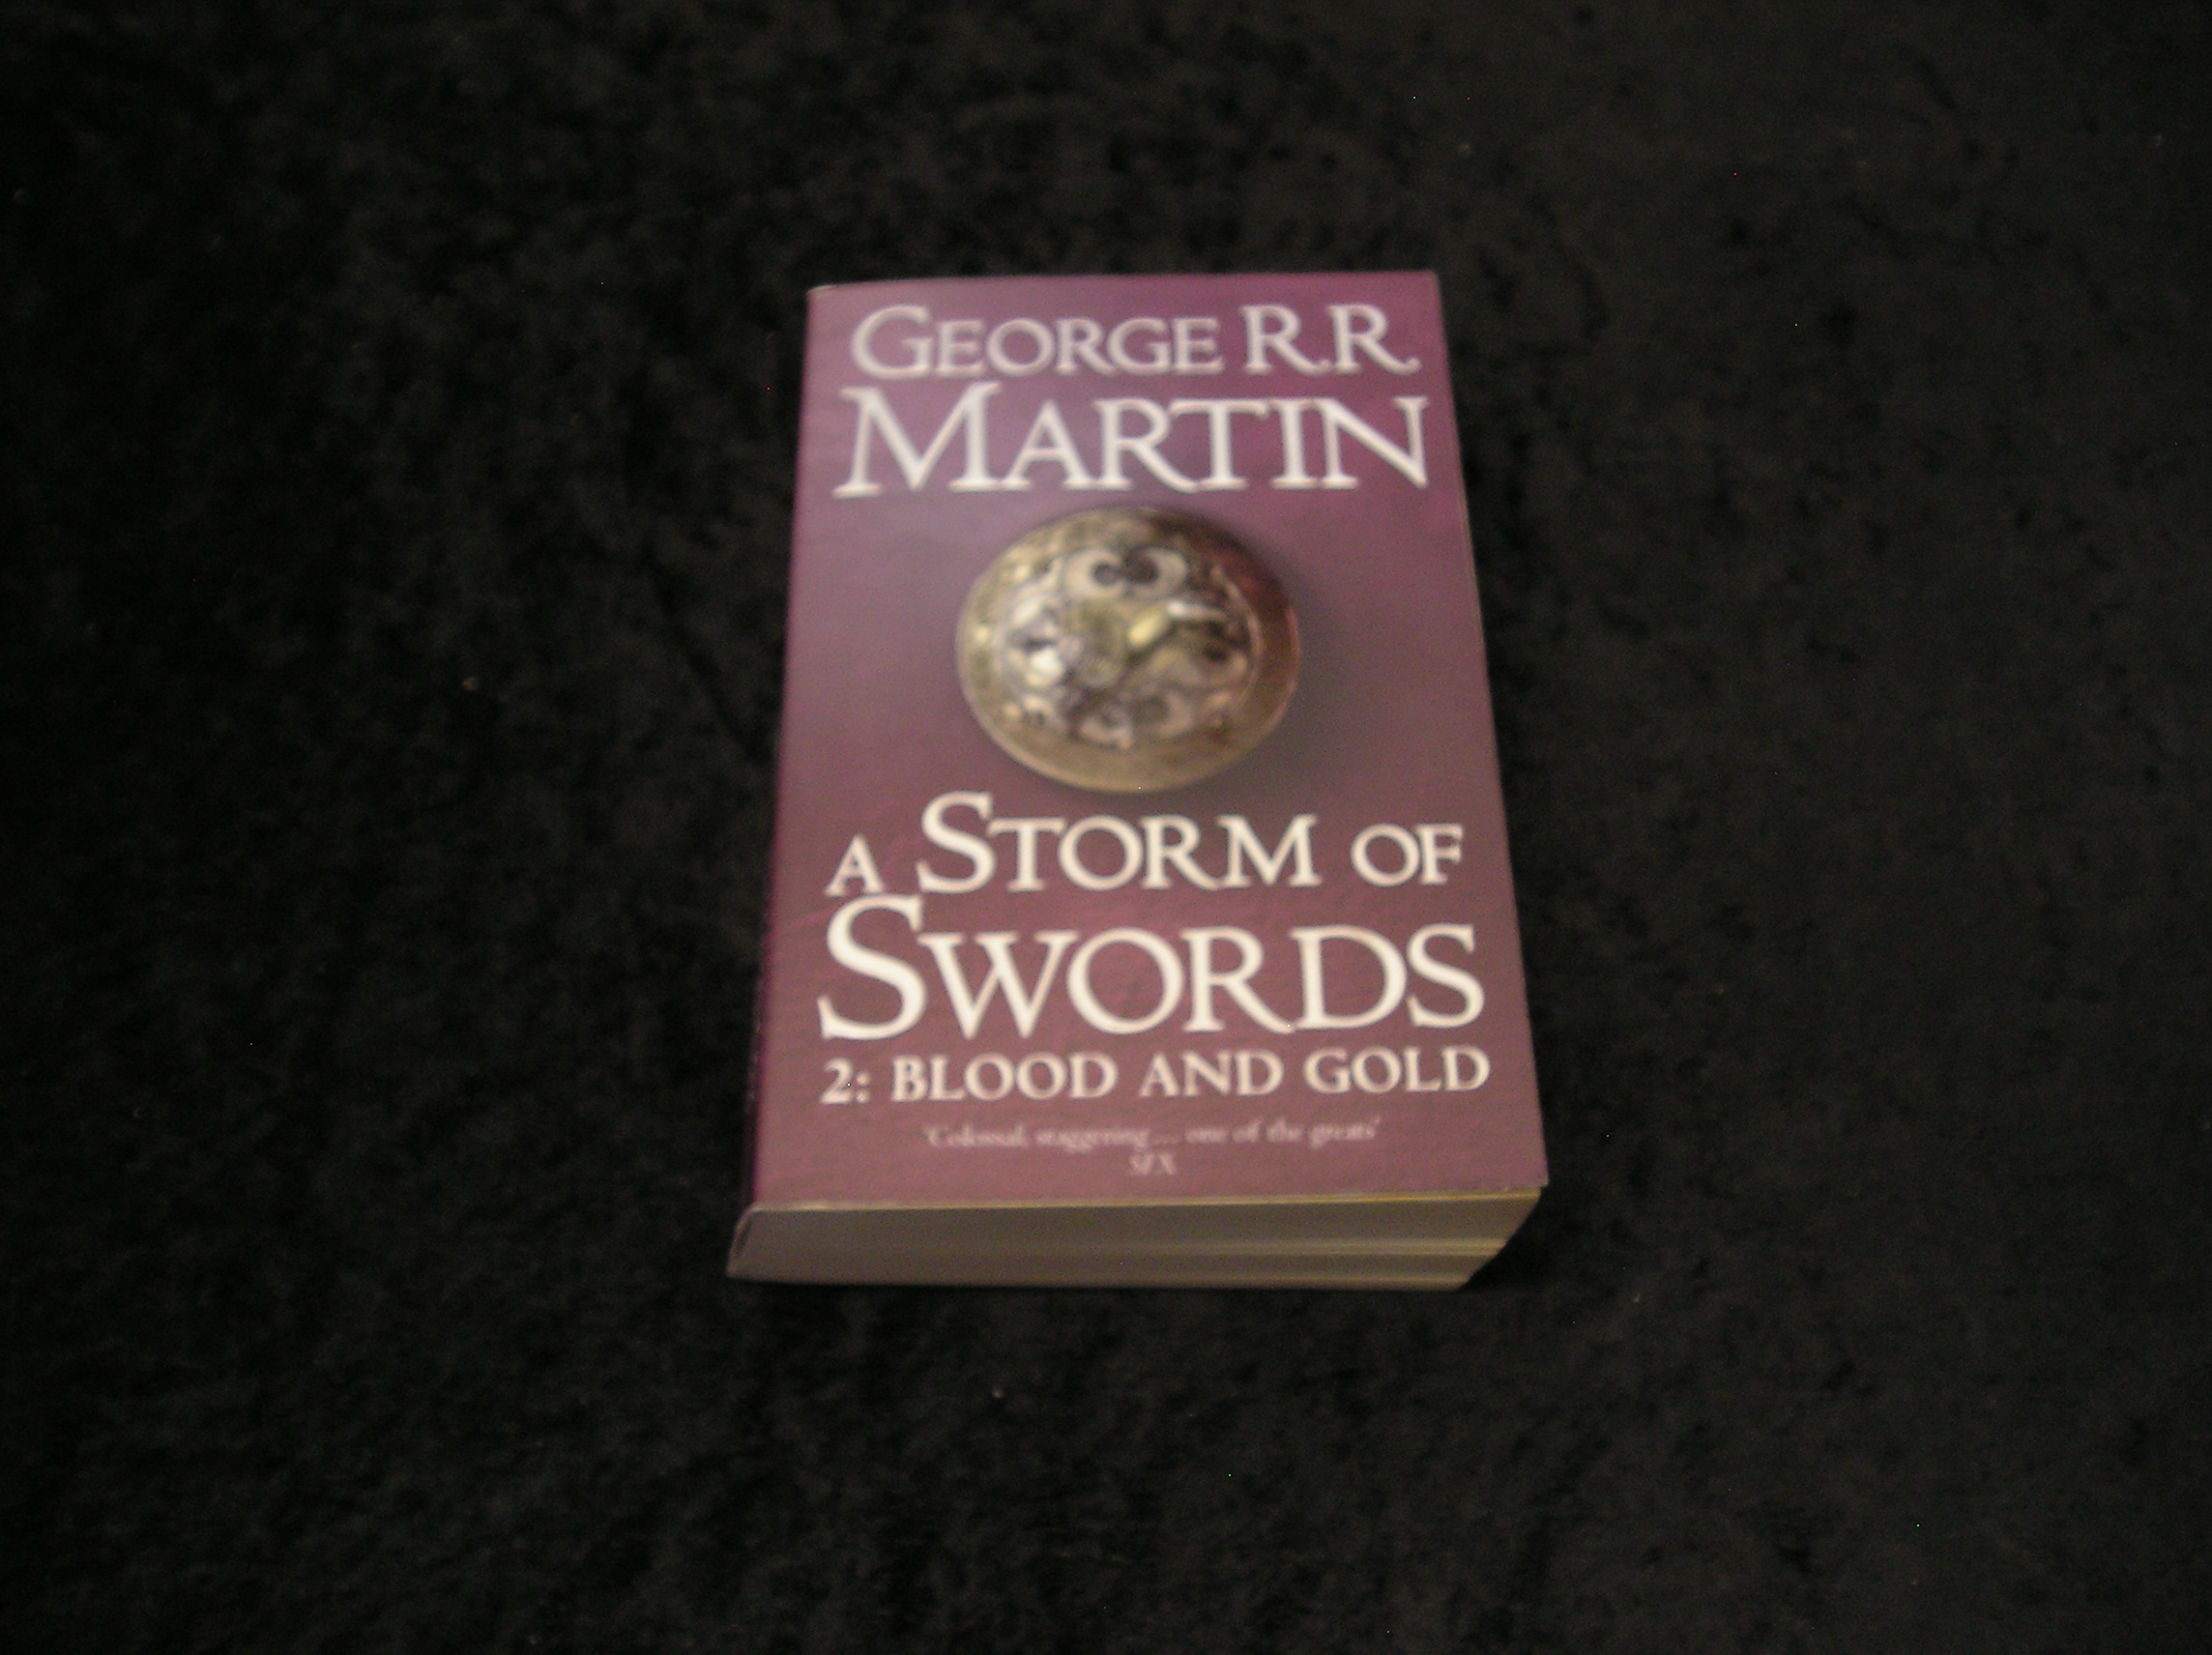 A Storm of Swords: 2 Blood and Gold